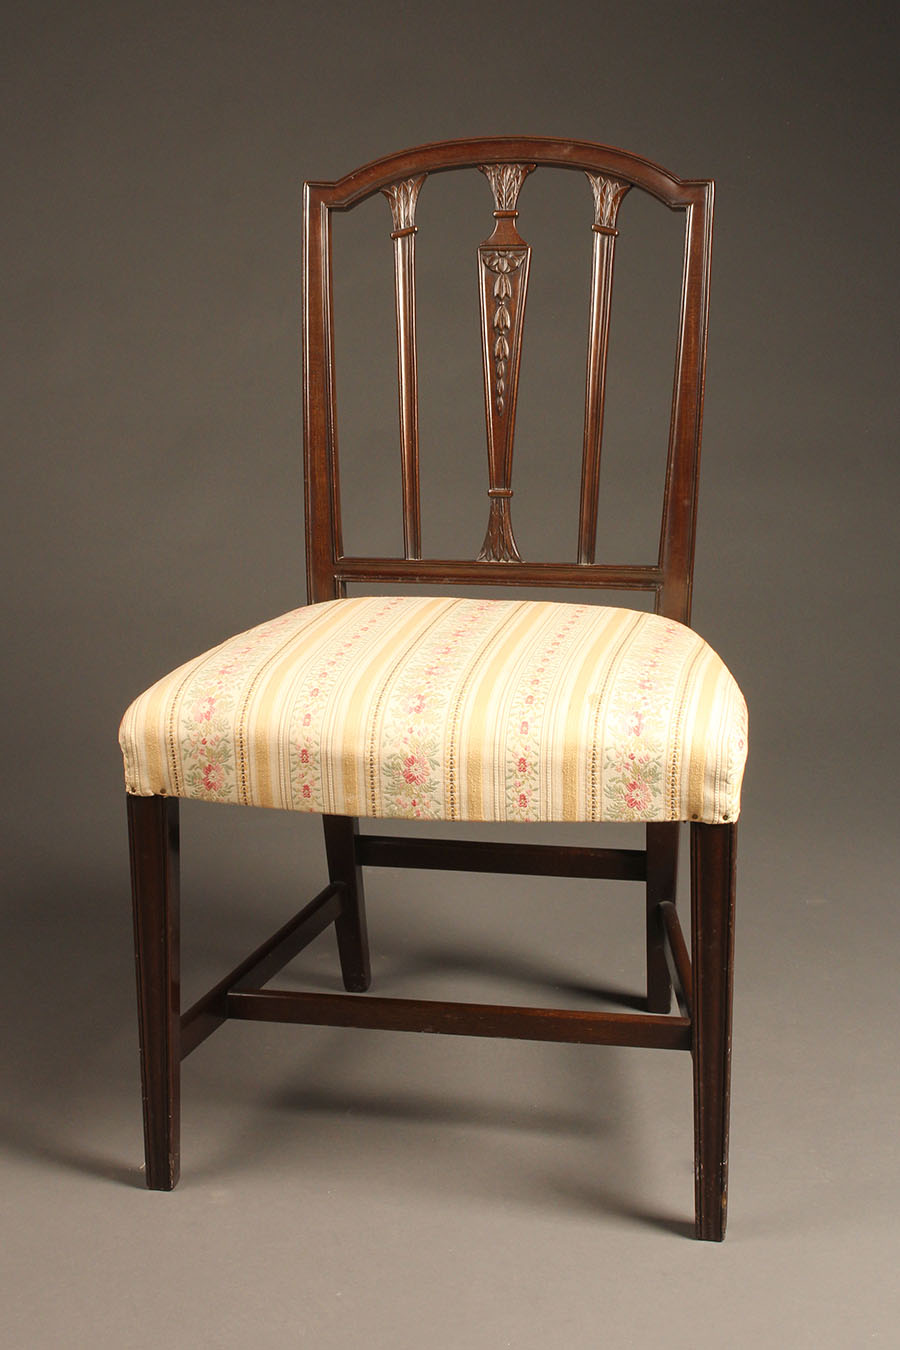 Download Antique pair of English Hepplewhite style side chairs.